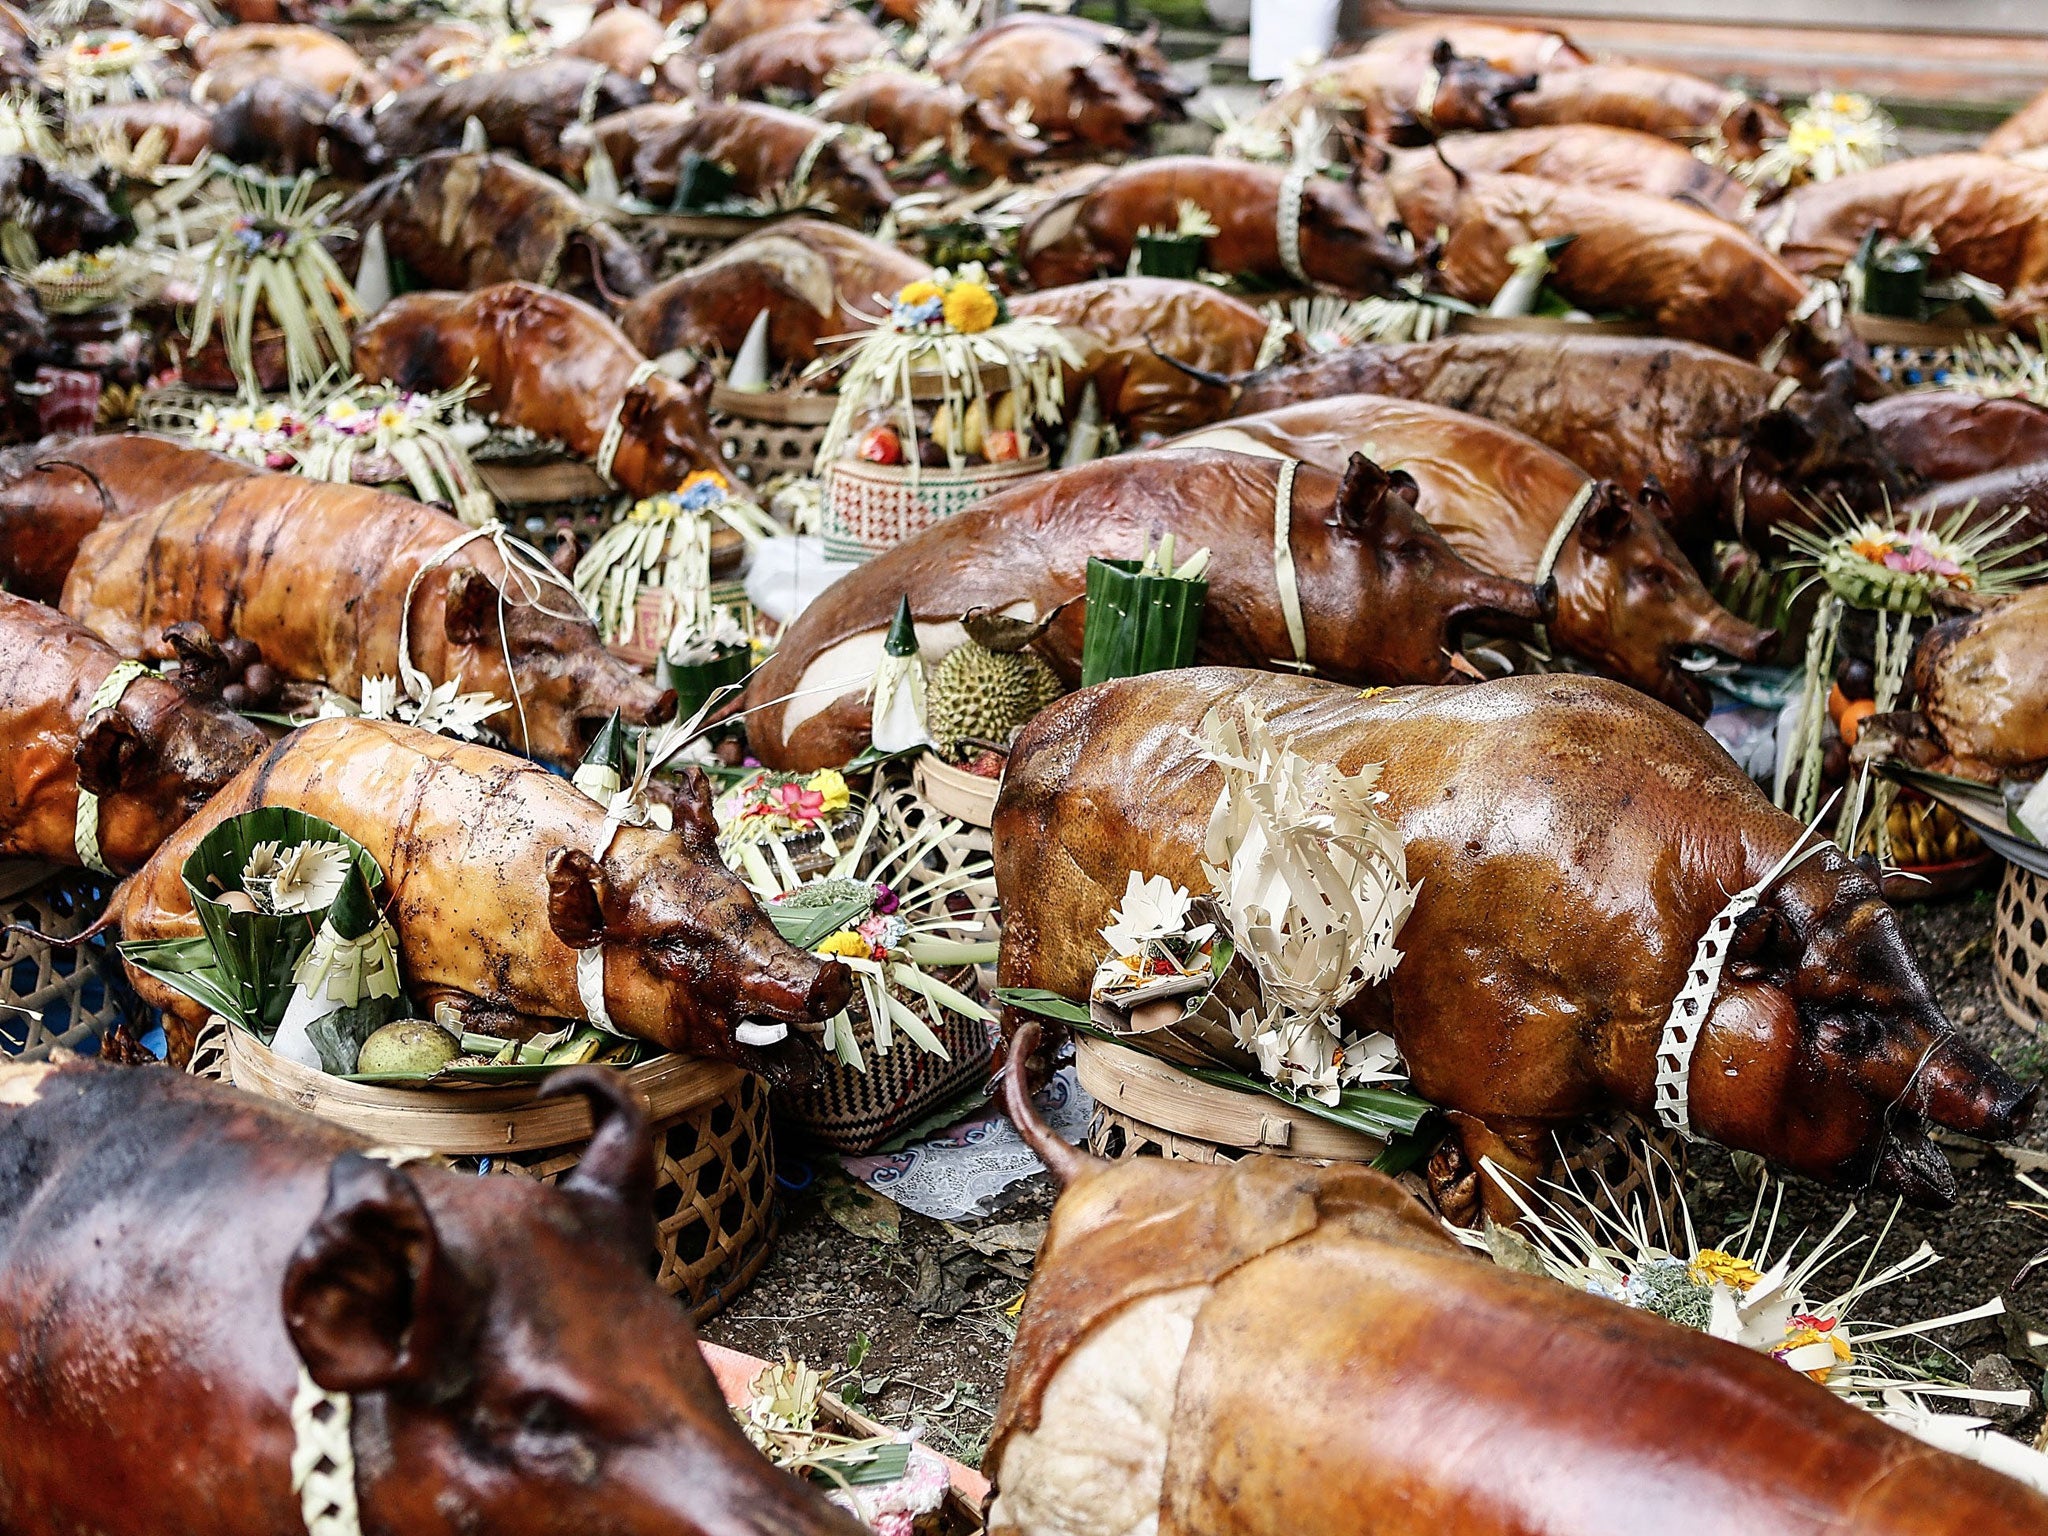 Hundreds of roasted pigs are placed in the Dalem Temple at Timbrah Village in Karangasem. Usaba Dalem is an annual ritual held by the people of Timbrah Village, during this ritual all the villagers will cook roasted pigs and carry them to Dalem Temple as